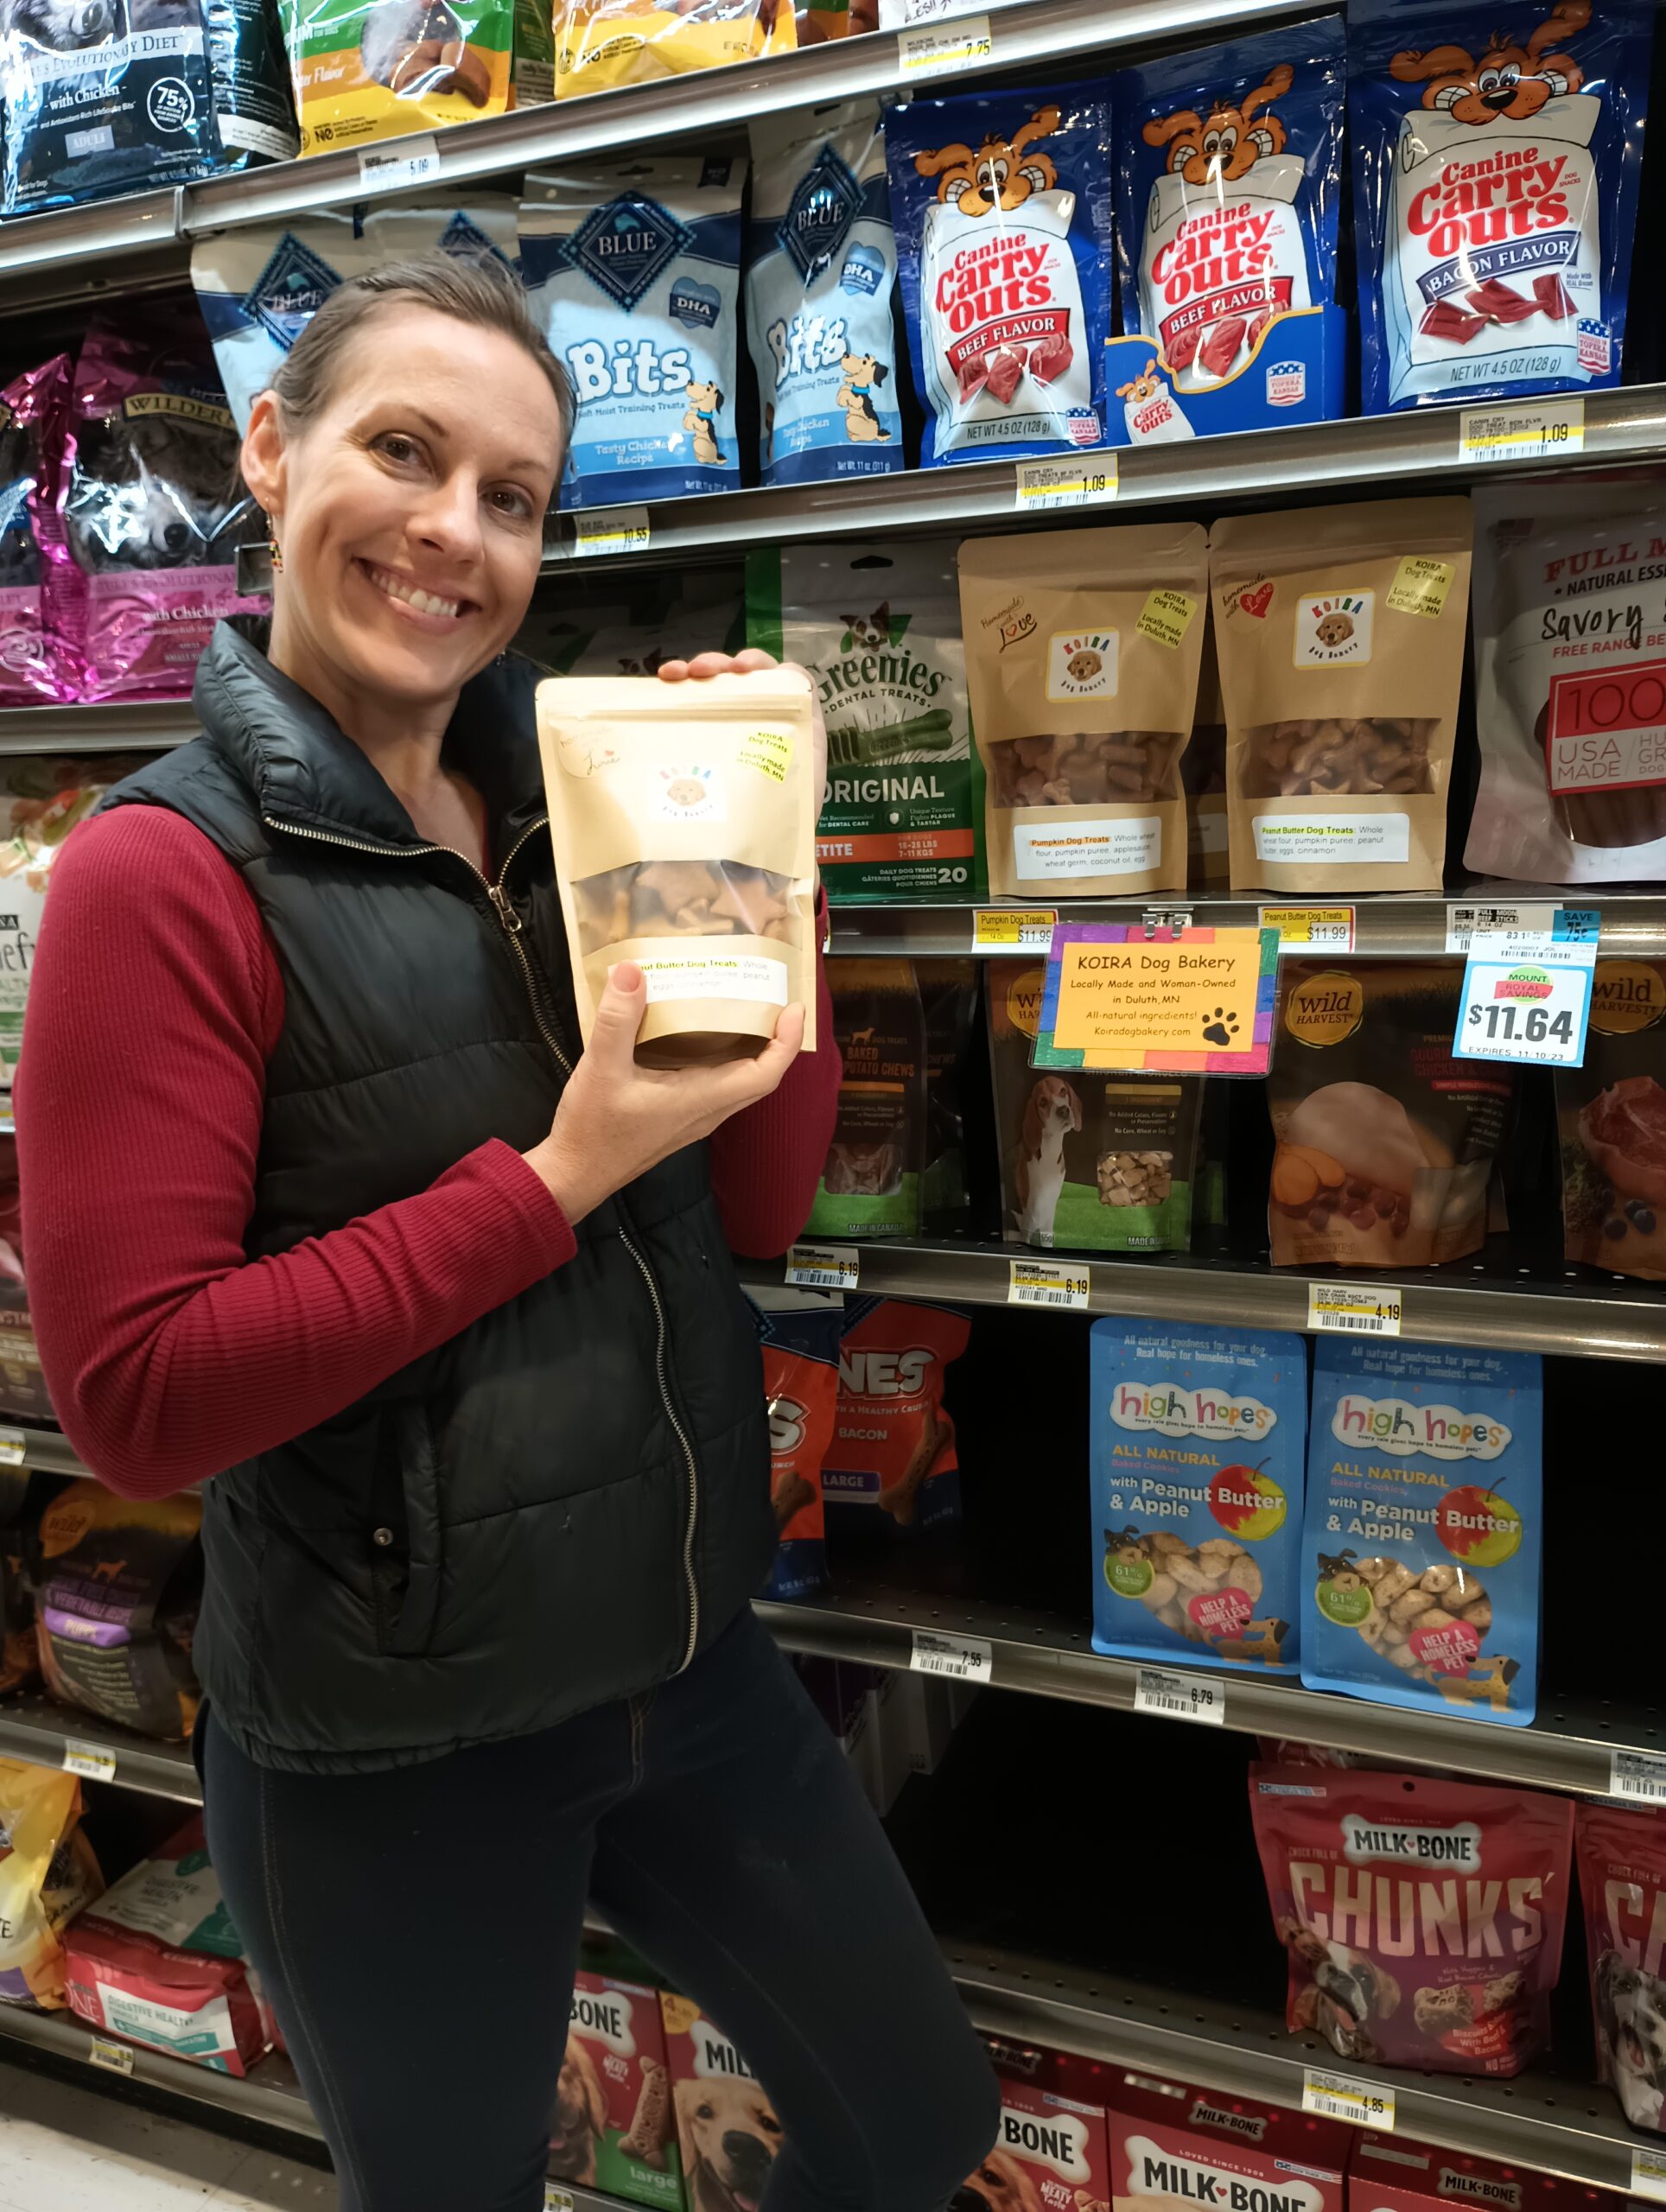 Sarah Carlson, owner of Koira Dog Bakery holding a bag of dog treats in a grocery store.